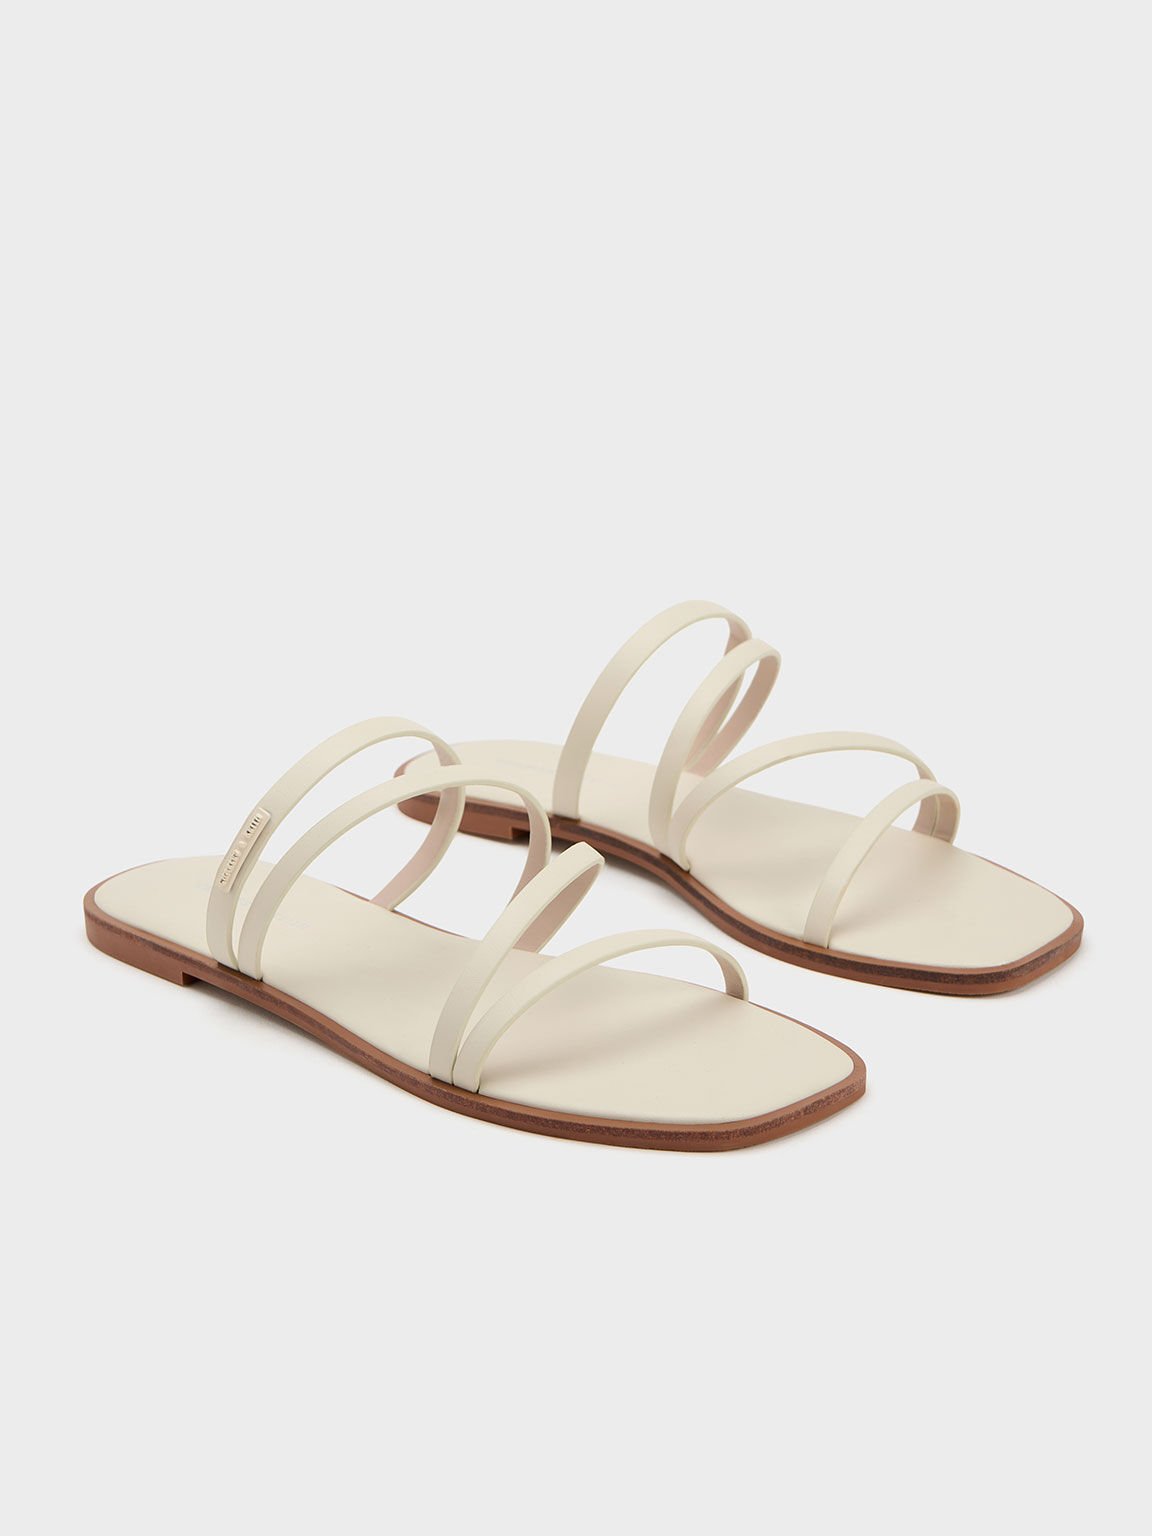 Women's Sandals | Shop Exclusive Styles | CHARLES & KEITH SG